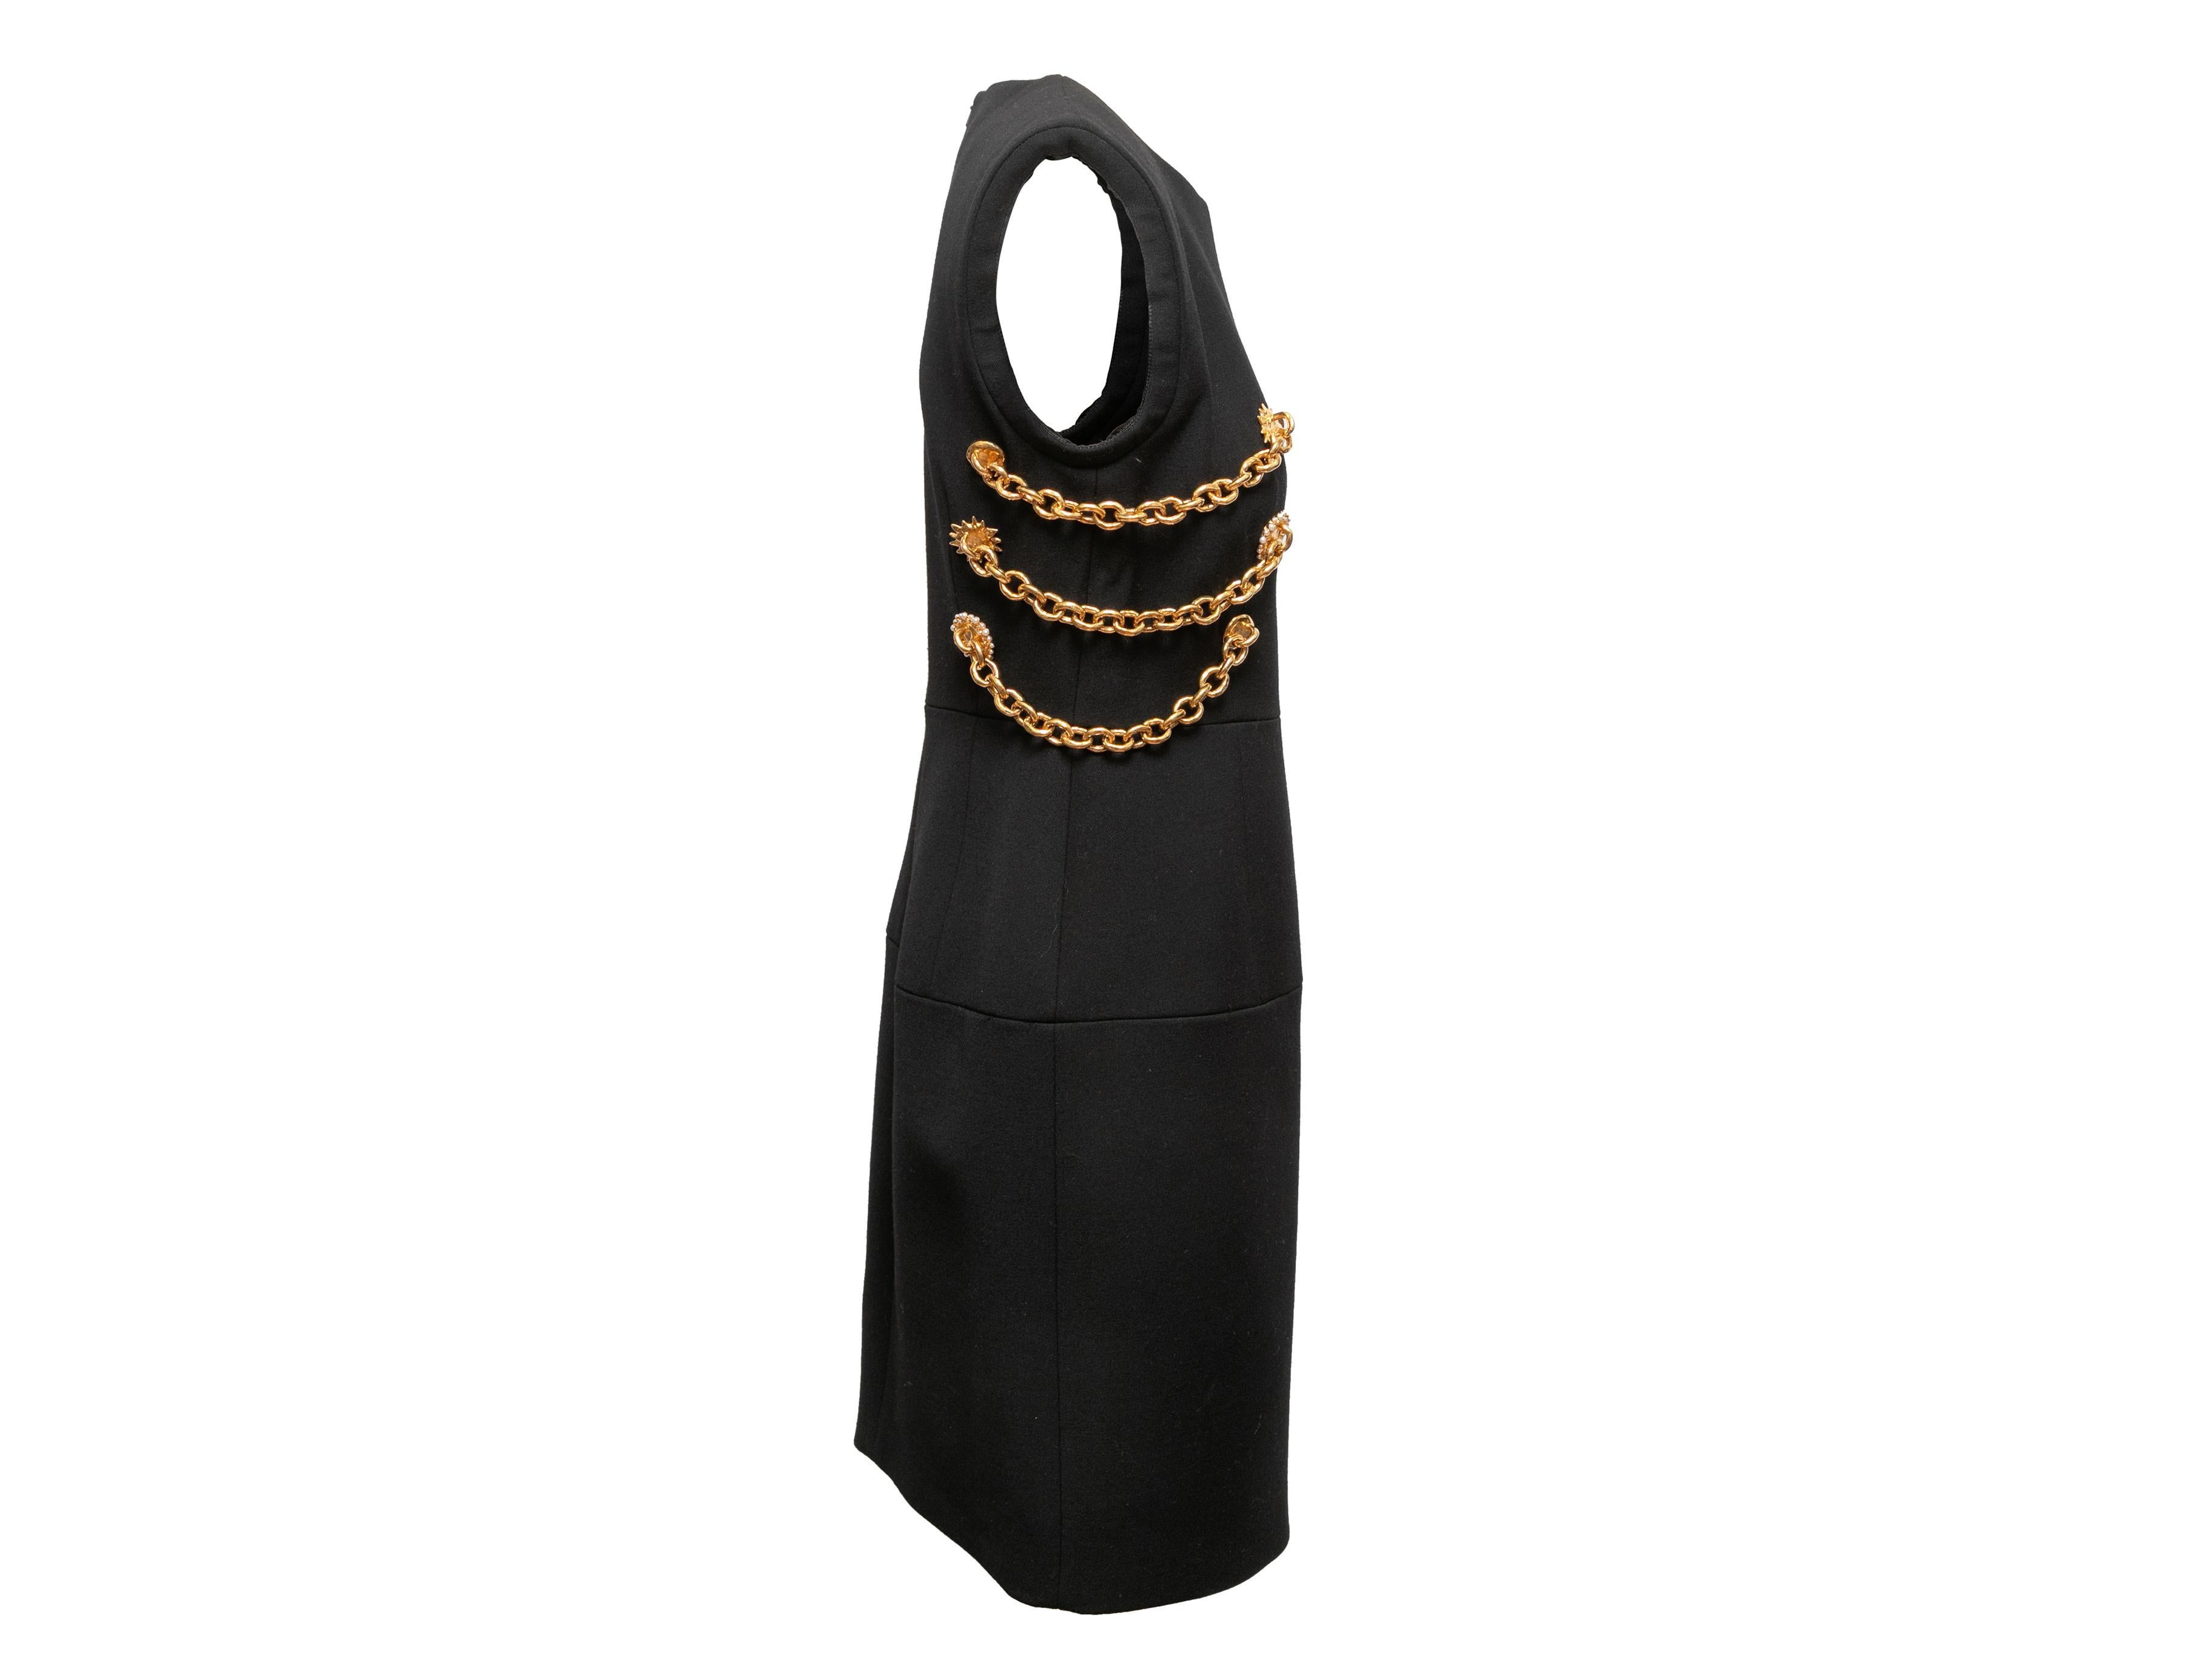 Black Stockman virgin wool sleeveless dress by Schiaparelli. From the Fall/Winter 2023 Collection. Crew neck. Gold-tone chain-link detailing at bodice sides. Zip closure at center back. 33